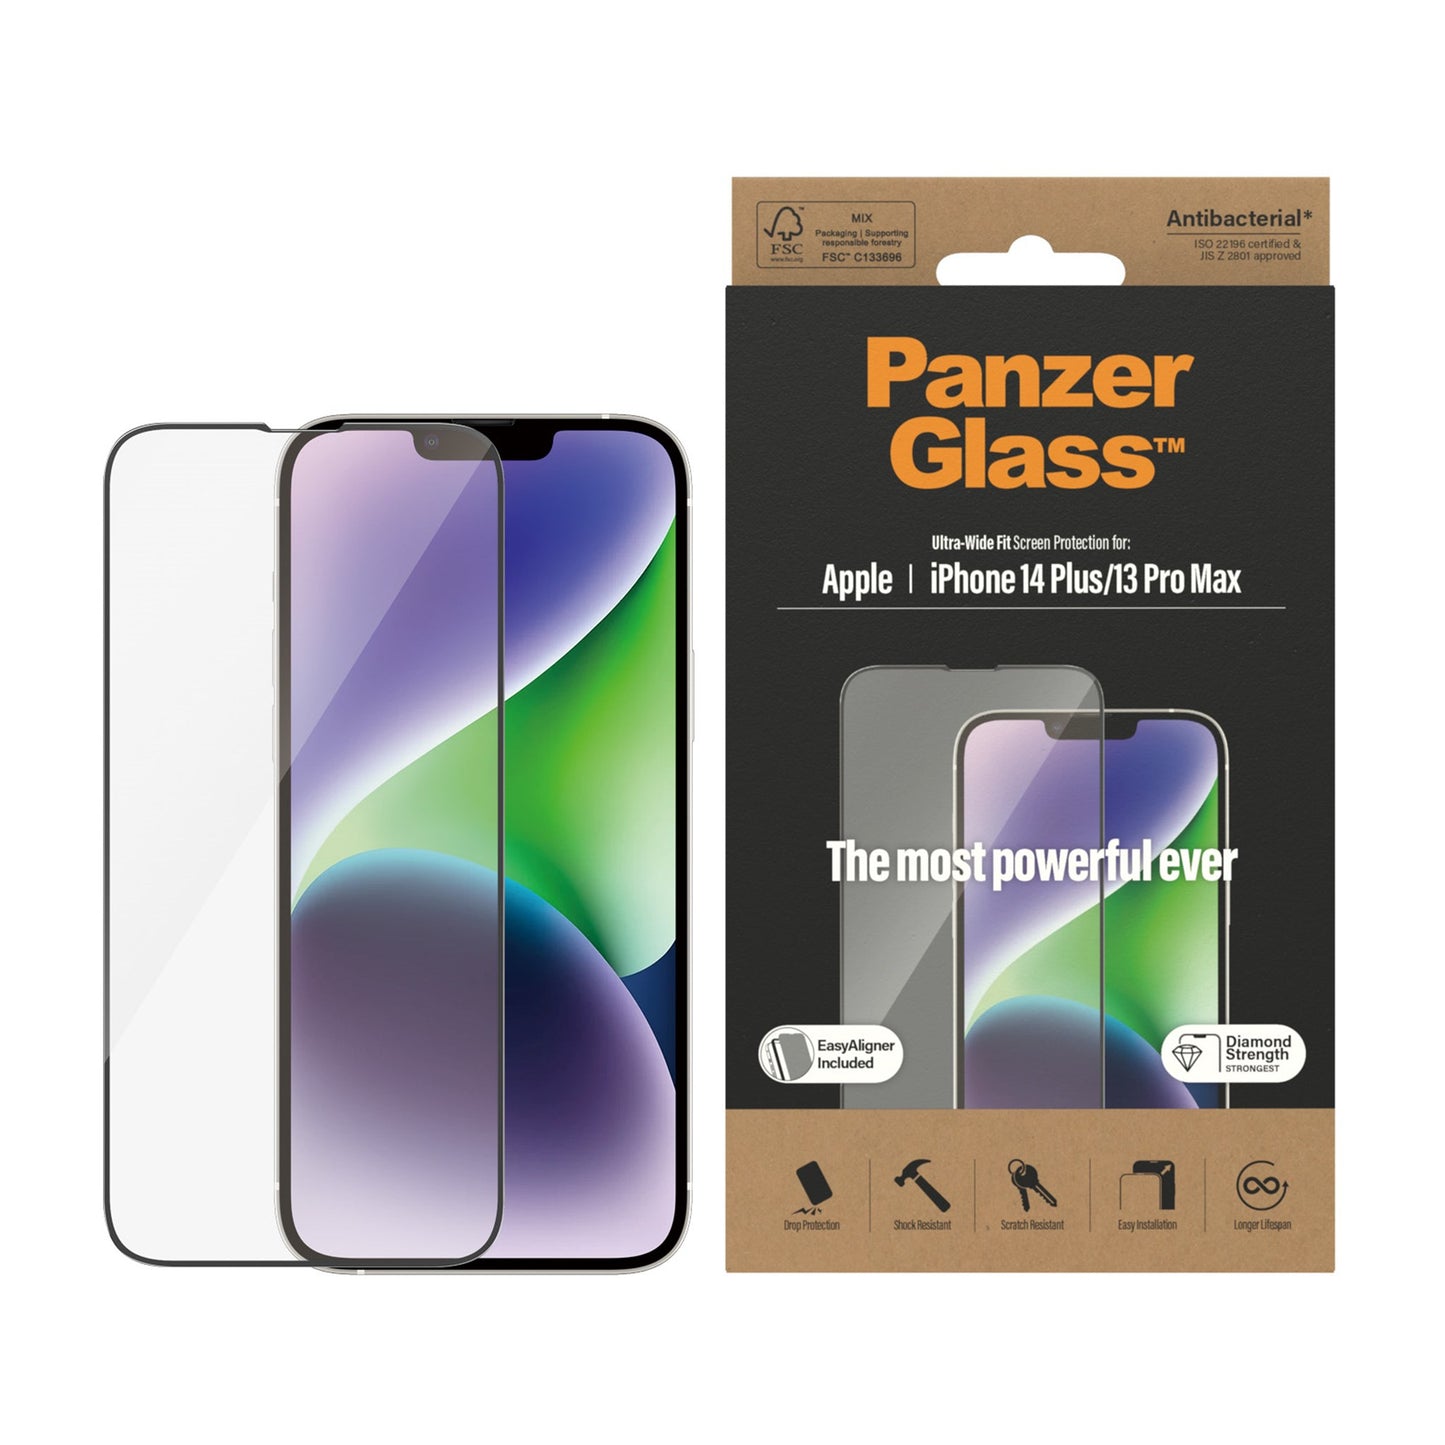 PanzerGlass™ Screen Protector Apple iPhone 14 Plus | 13 Pro Max | Ultra-Wide Fit w. EasyAligner 2